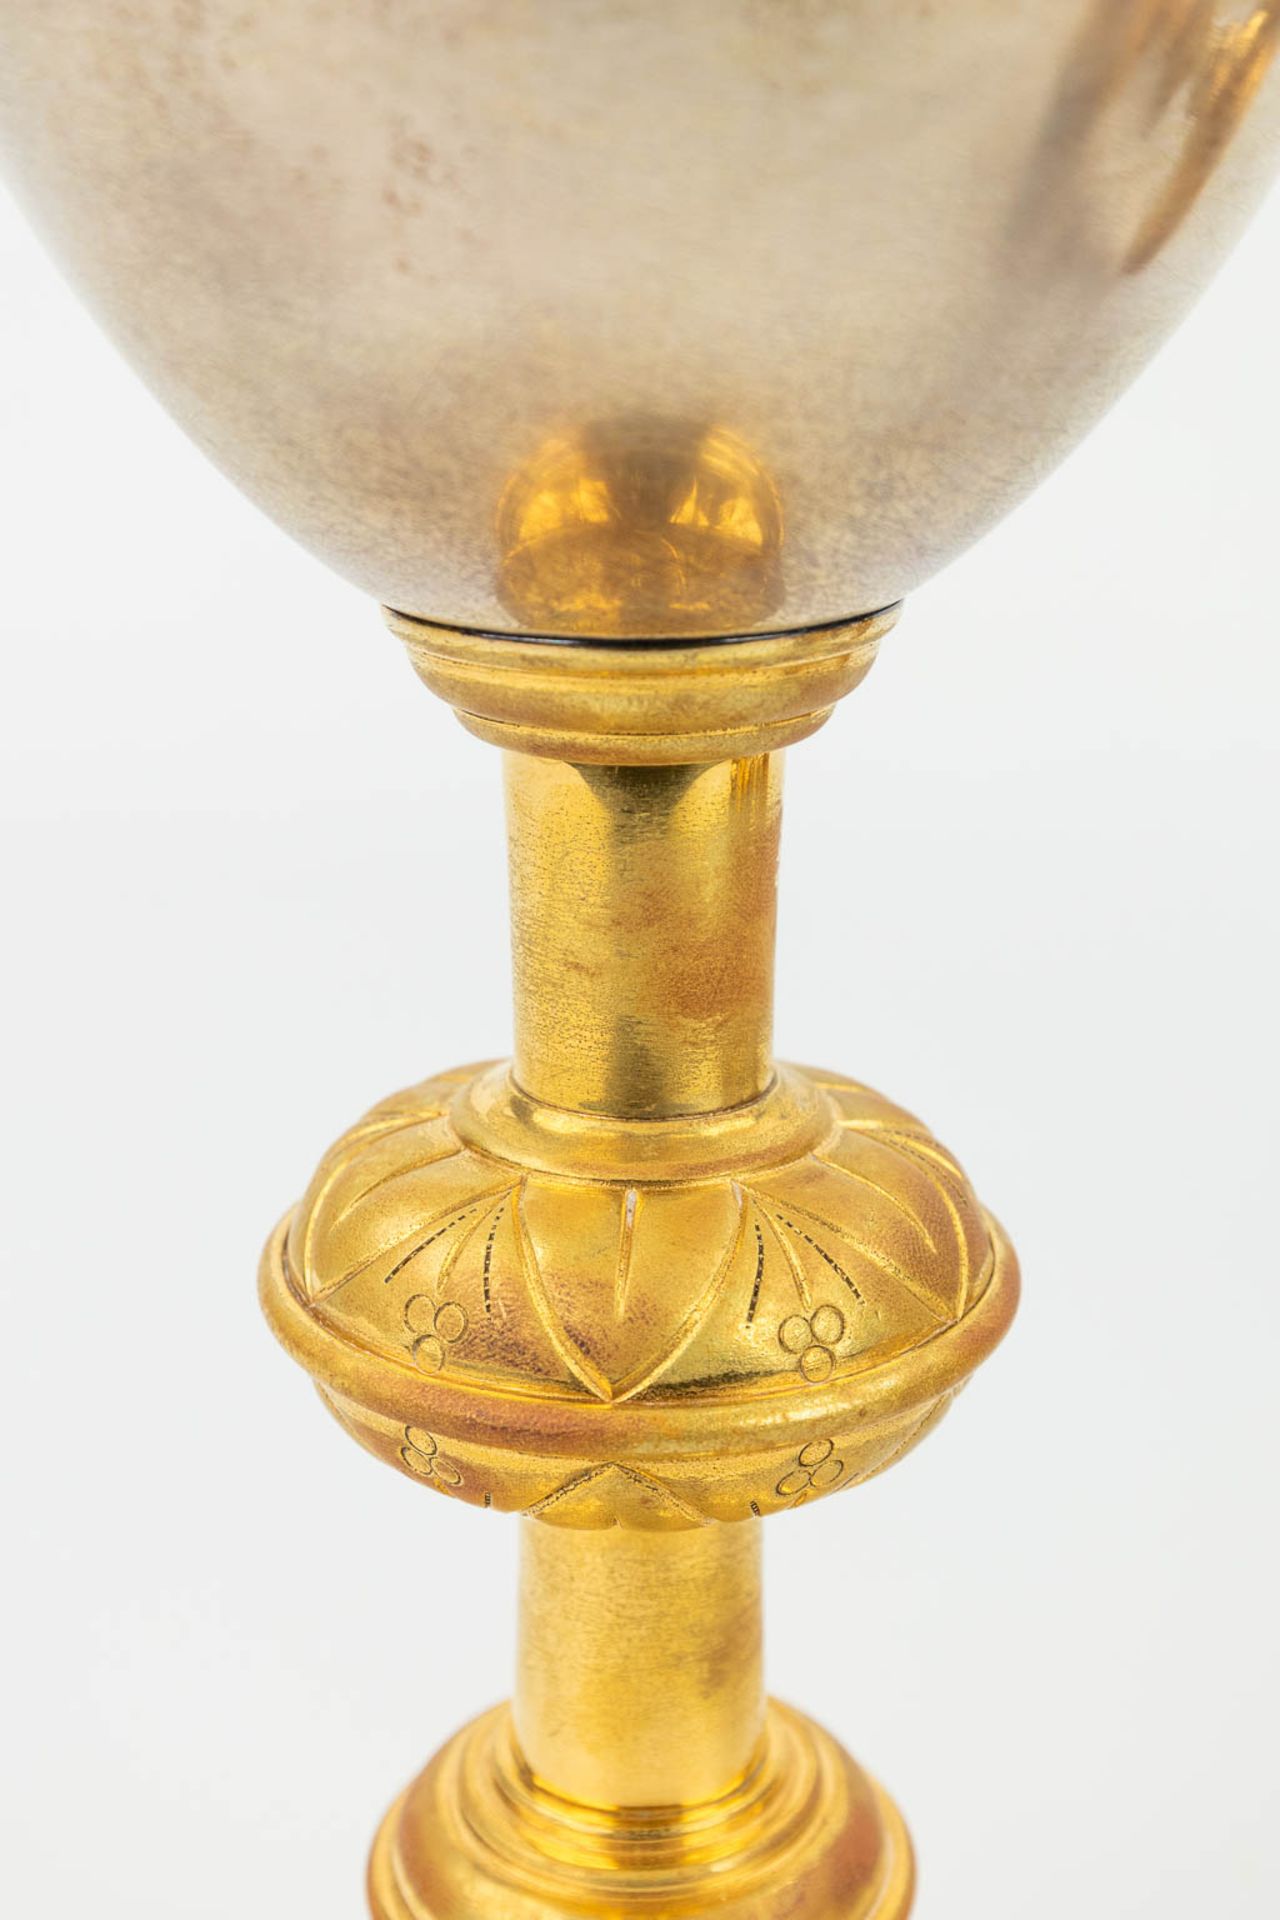 A collection of 4 large ciboria and a chalice made of silver and gold plated metal. - Image 16 of 24